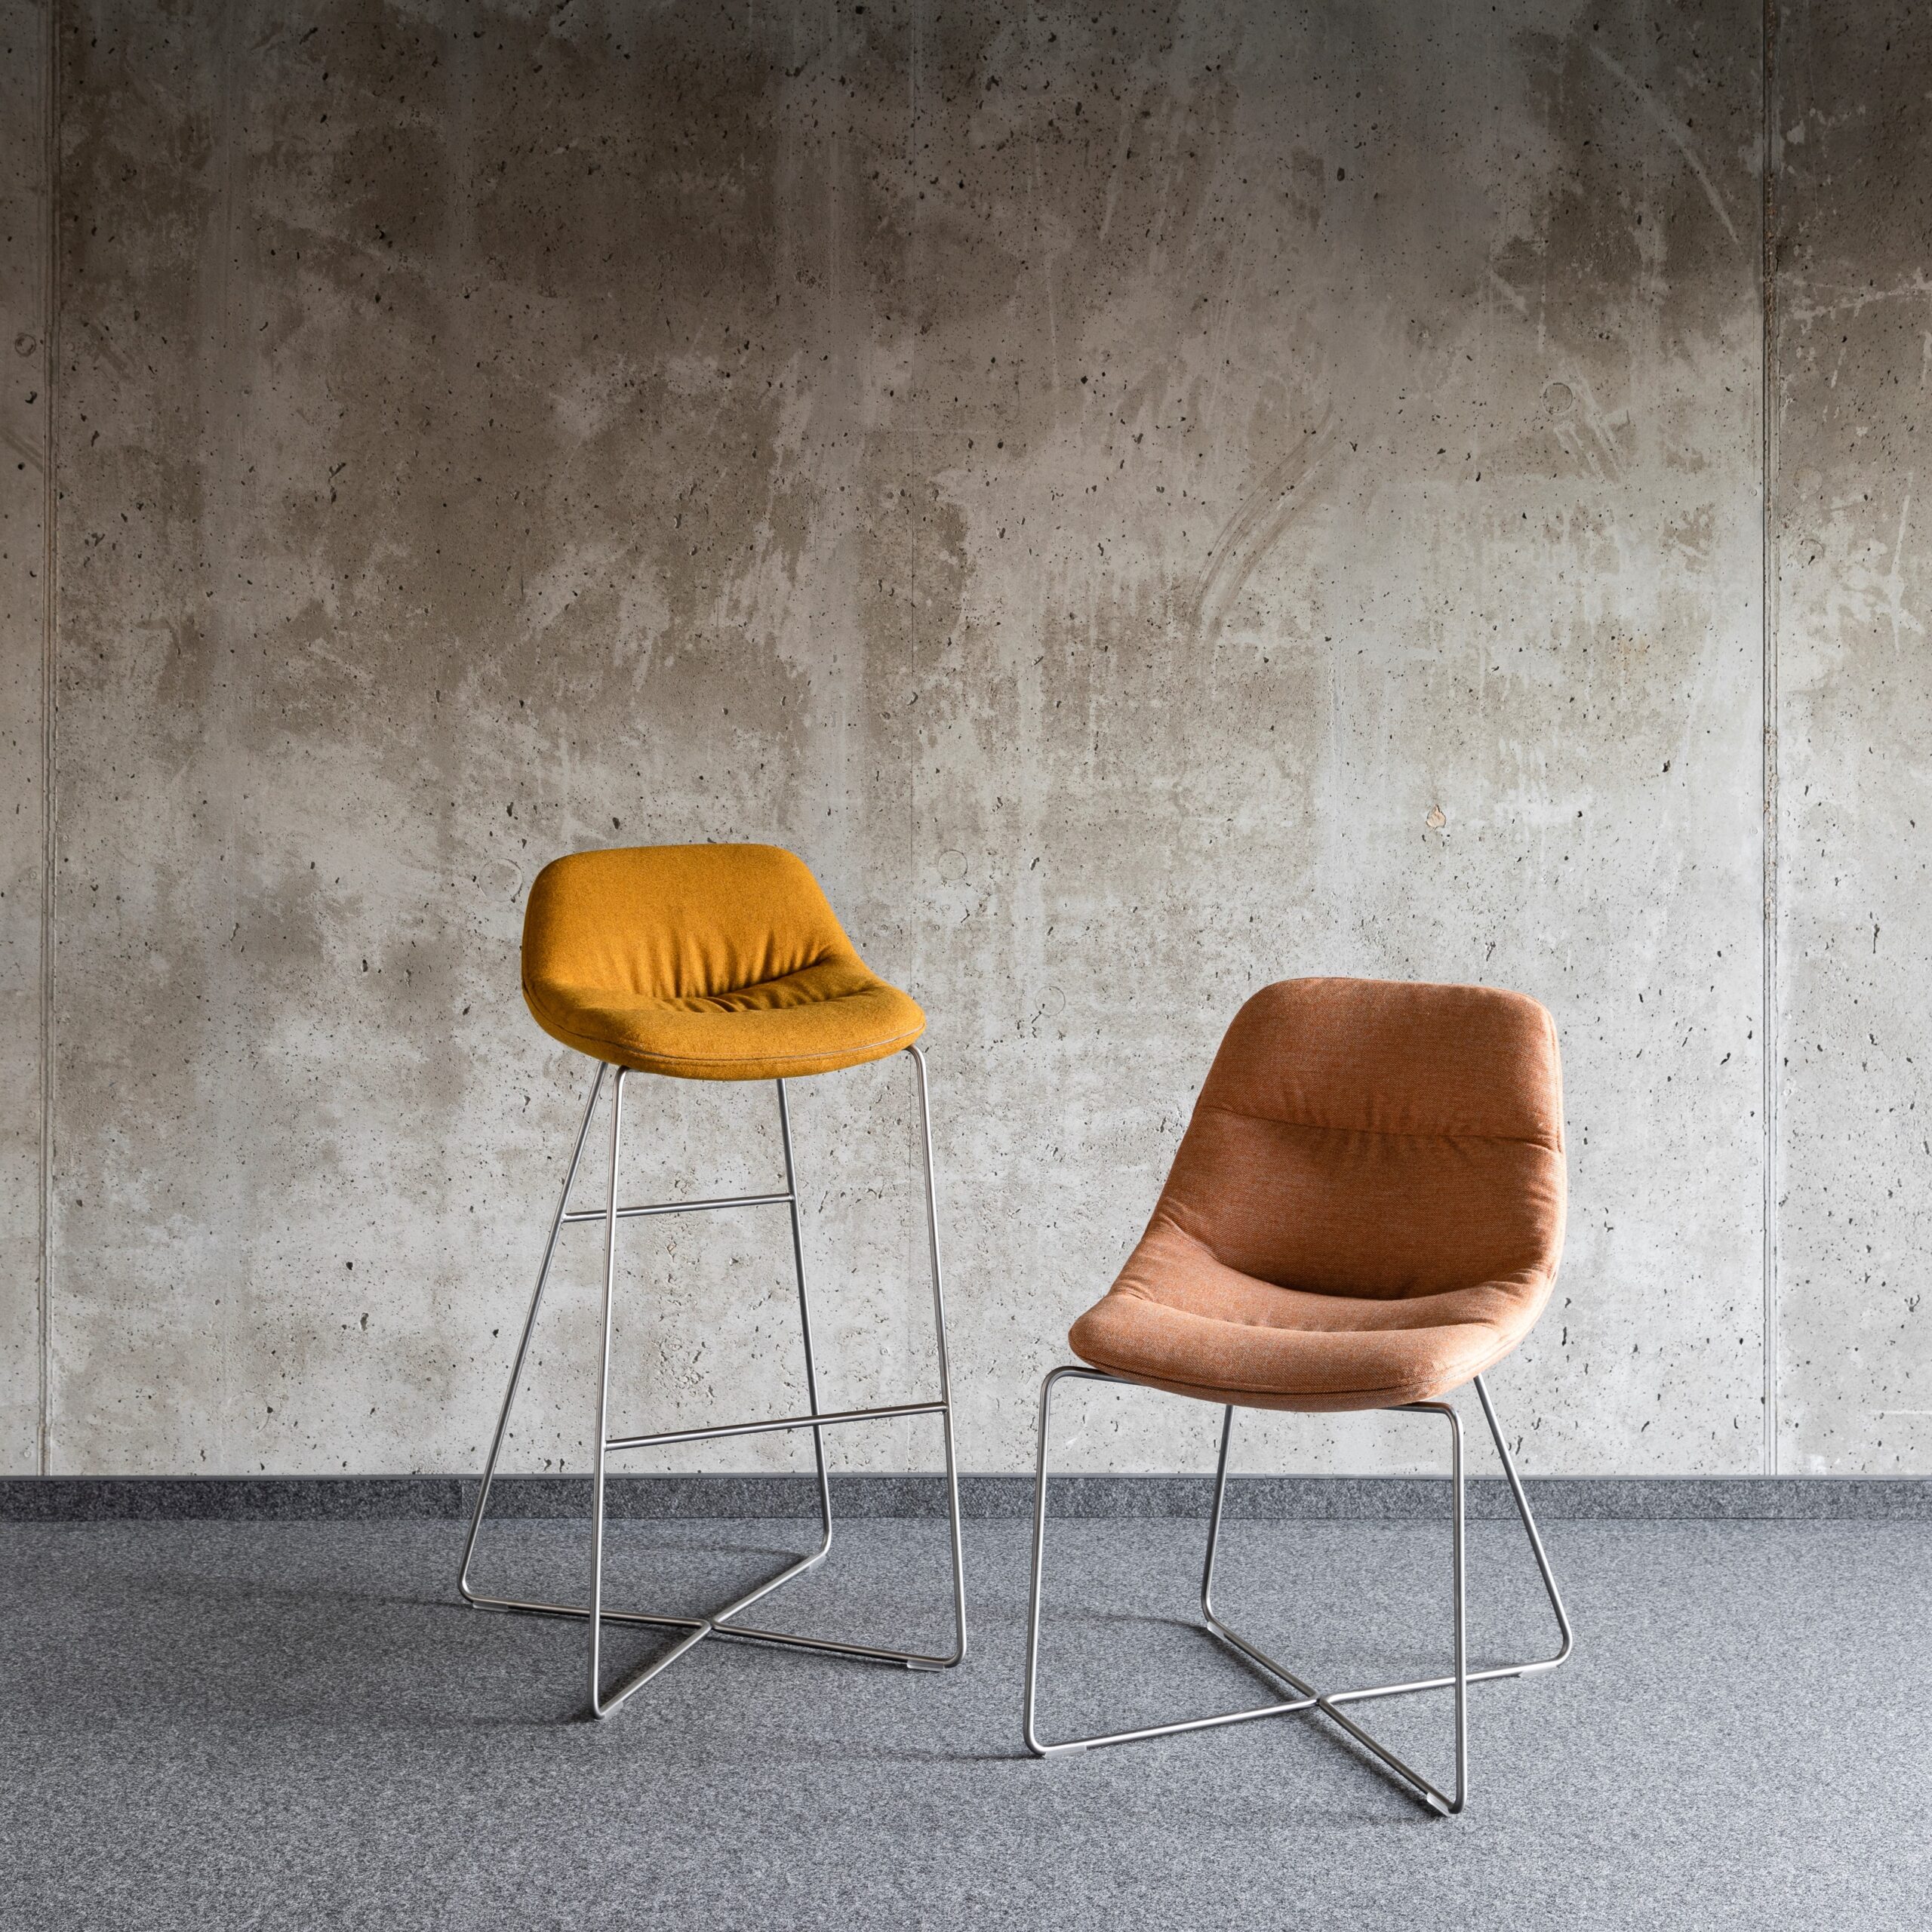 mishell soft chairs